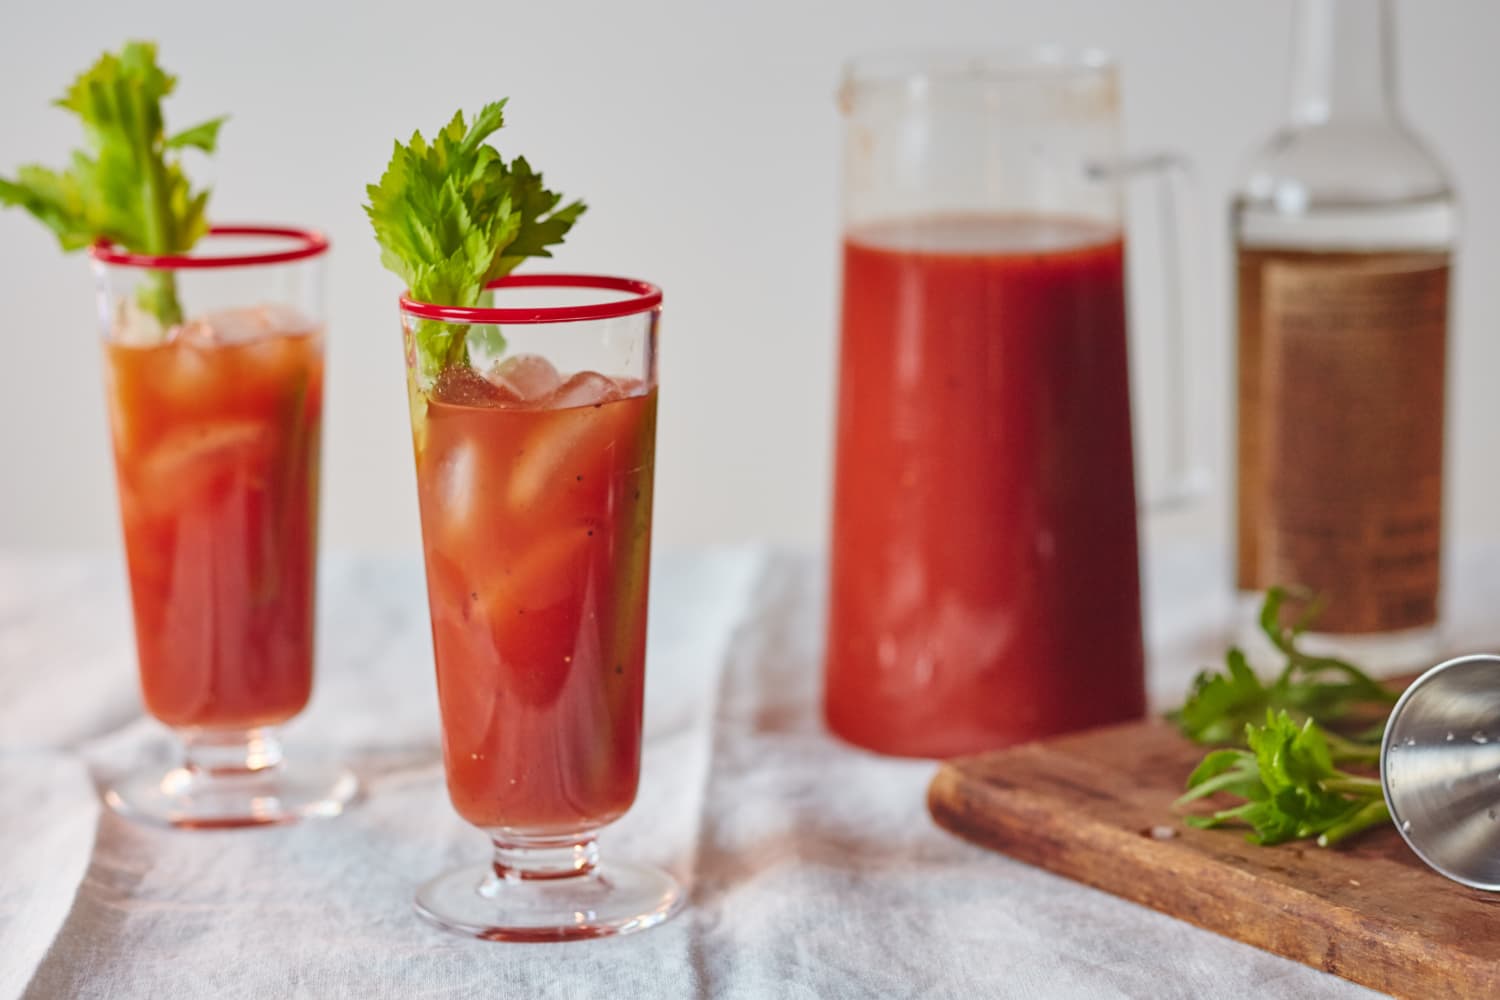 How To Make a Great Bloody Mary